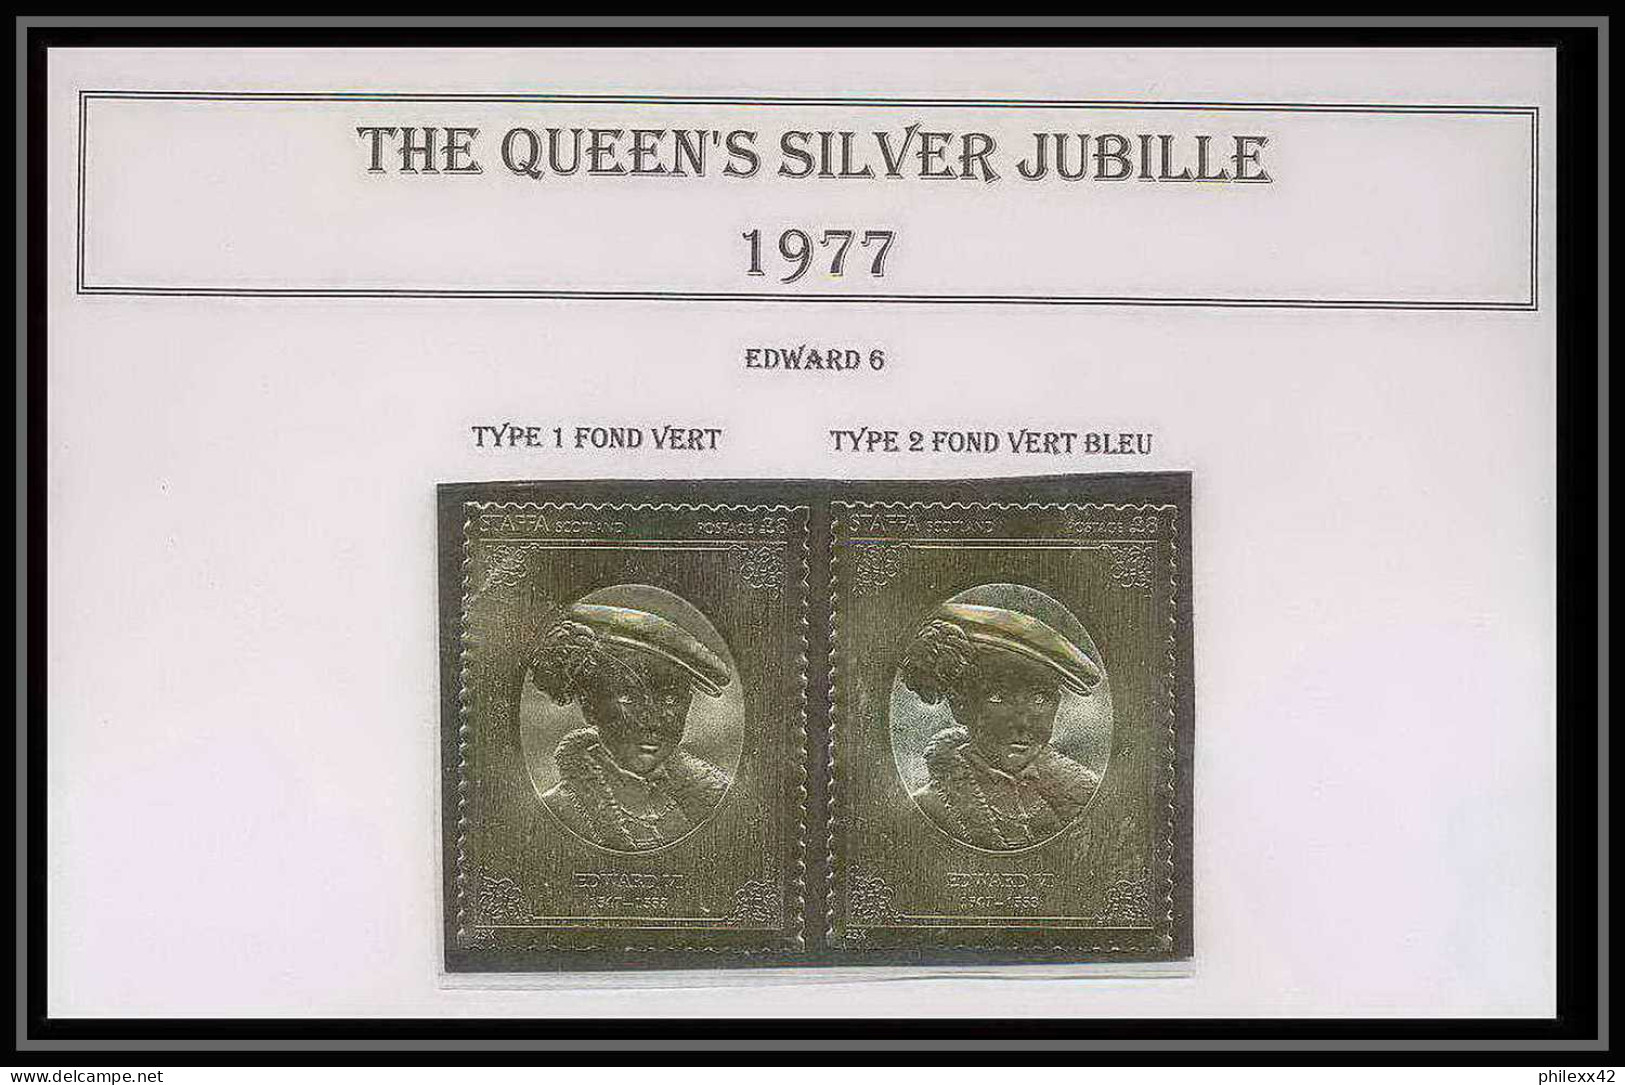 460 Staffa Scotland The Queen's Silver Jubilee 1977 OR Gold Stamps Monarchy United Kingdom Edward 6 Type 1&2 Neuf** Mnh - Emisiones Locales